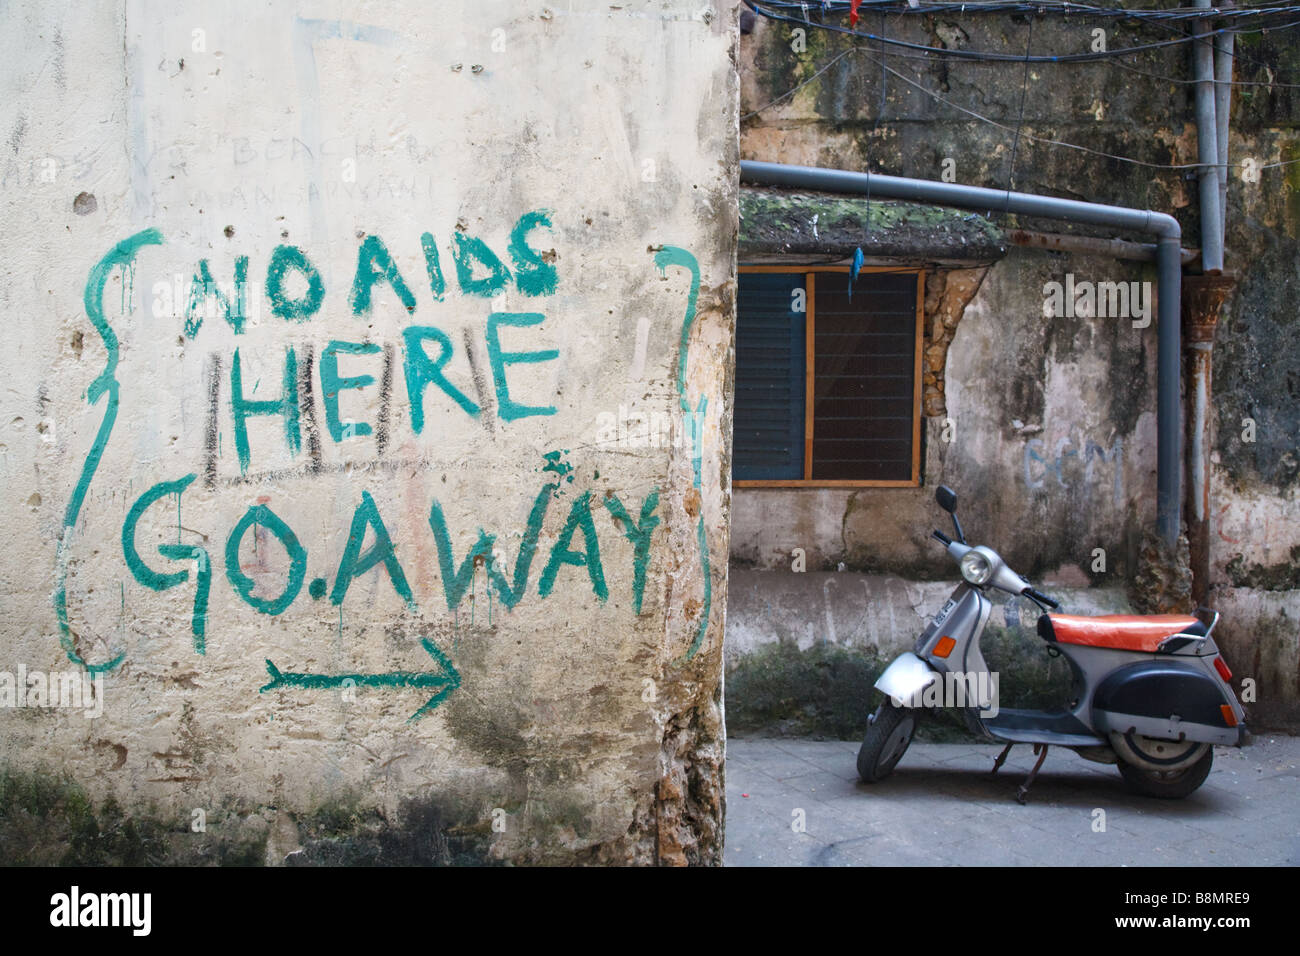 AIDS slogan graffiti on the wall and a scooter in the historic centre of UNESCO listed Stone Town in Zanzibar, Tanzania Stock Photo